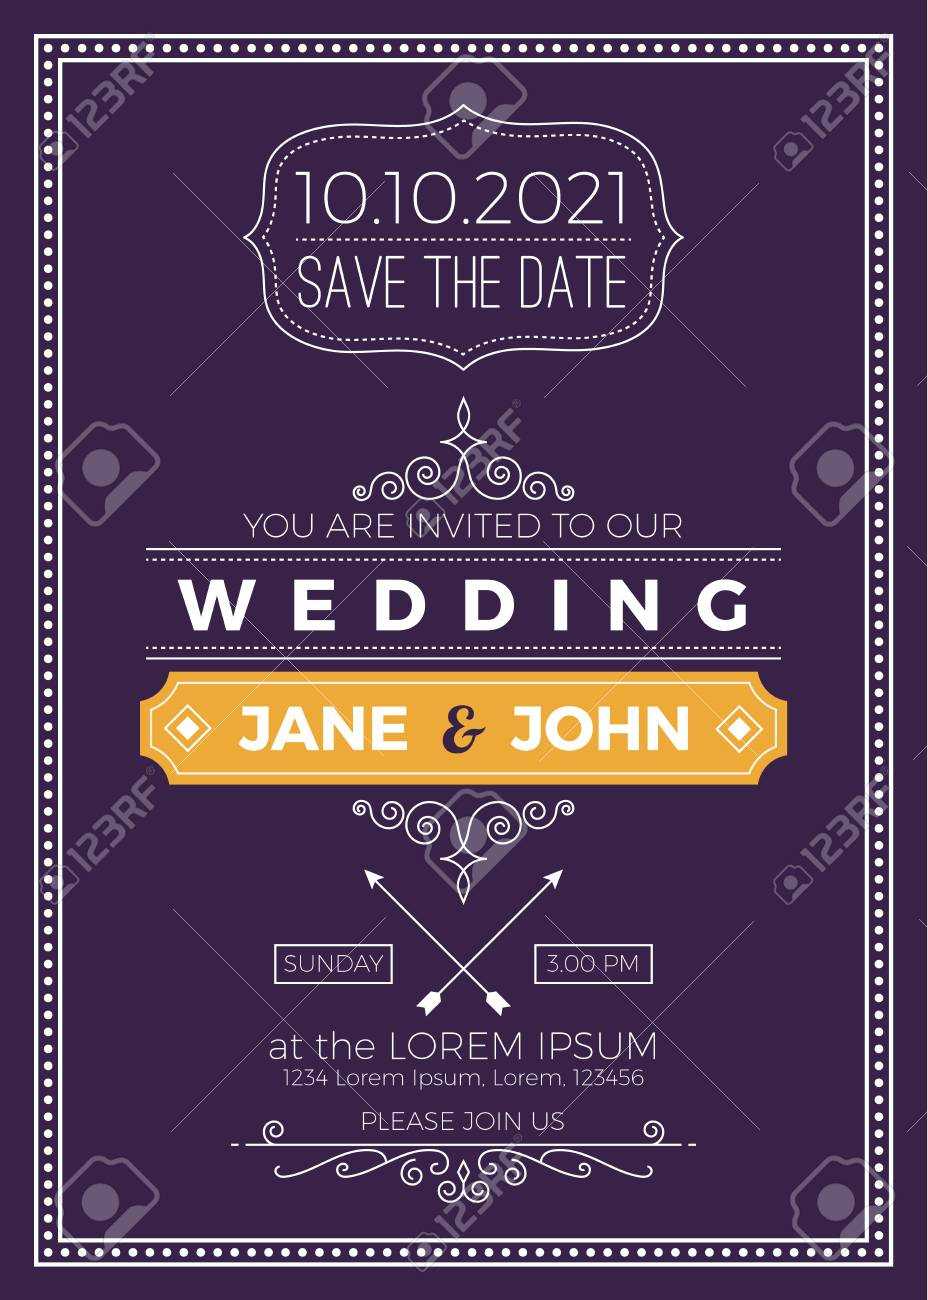 Vintage Wedding Invitation Card A5 Size Frame Layout Print Template With Regard To Wedding Card Size Template